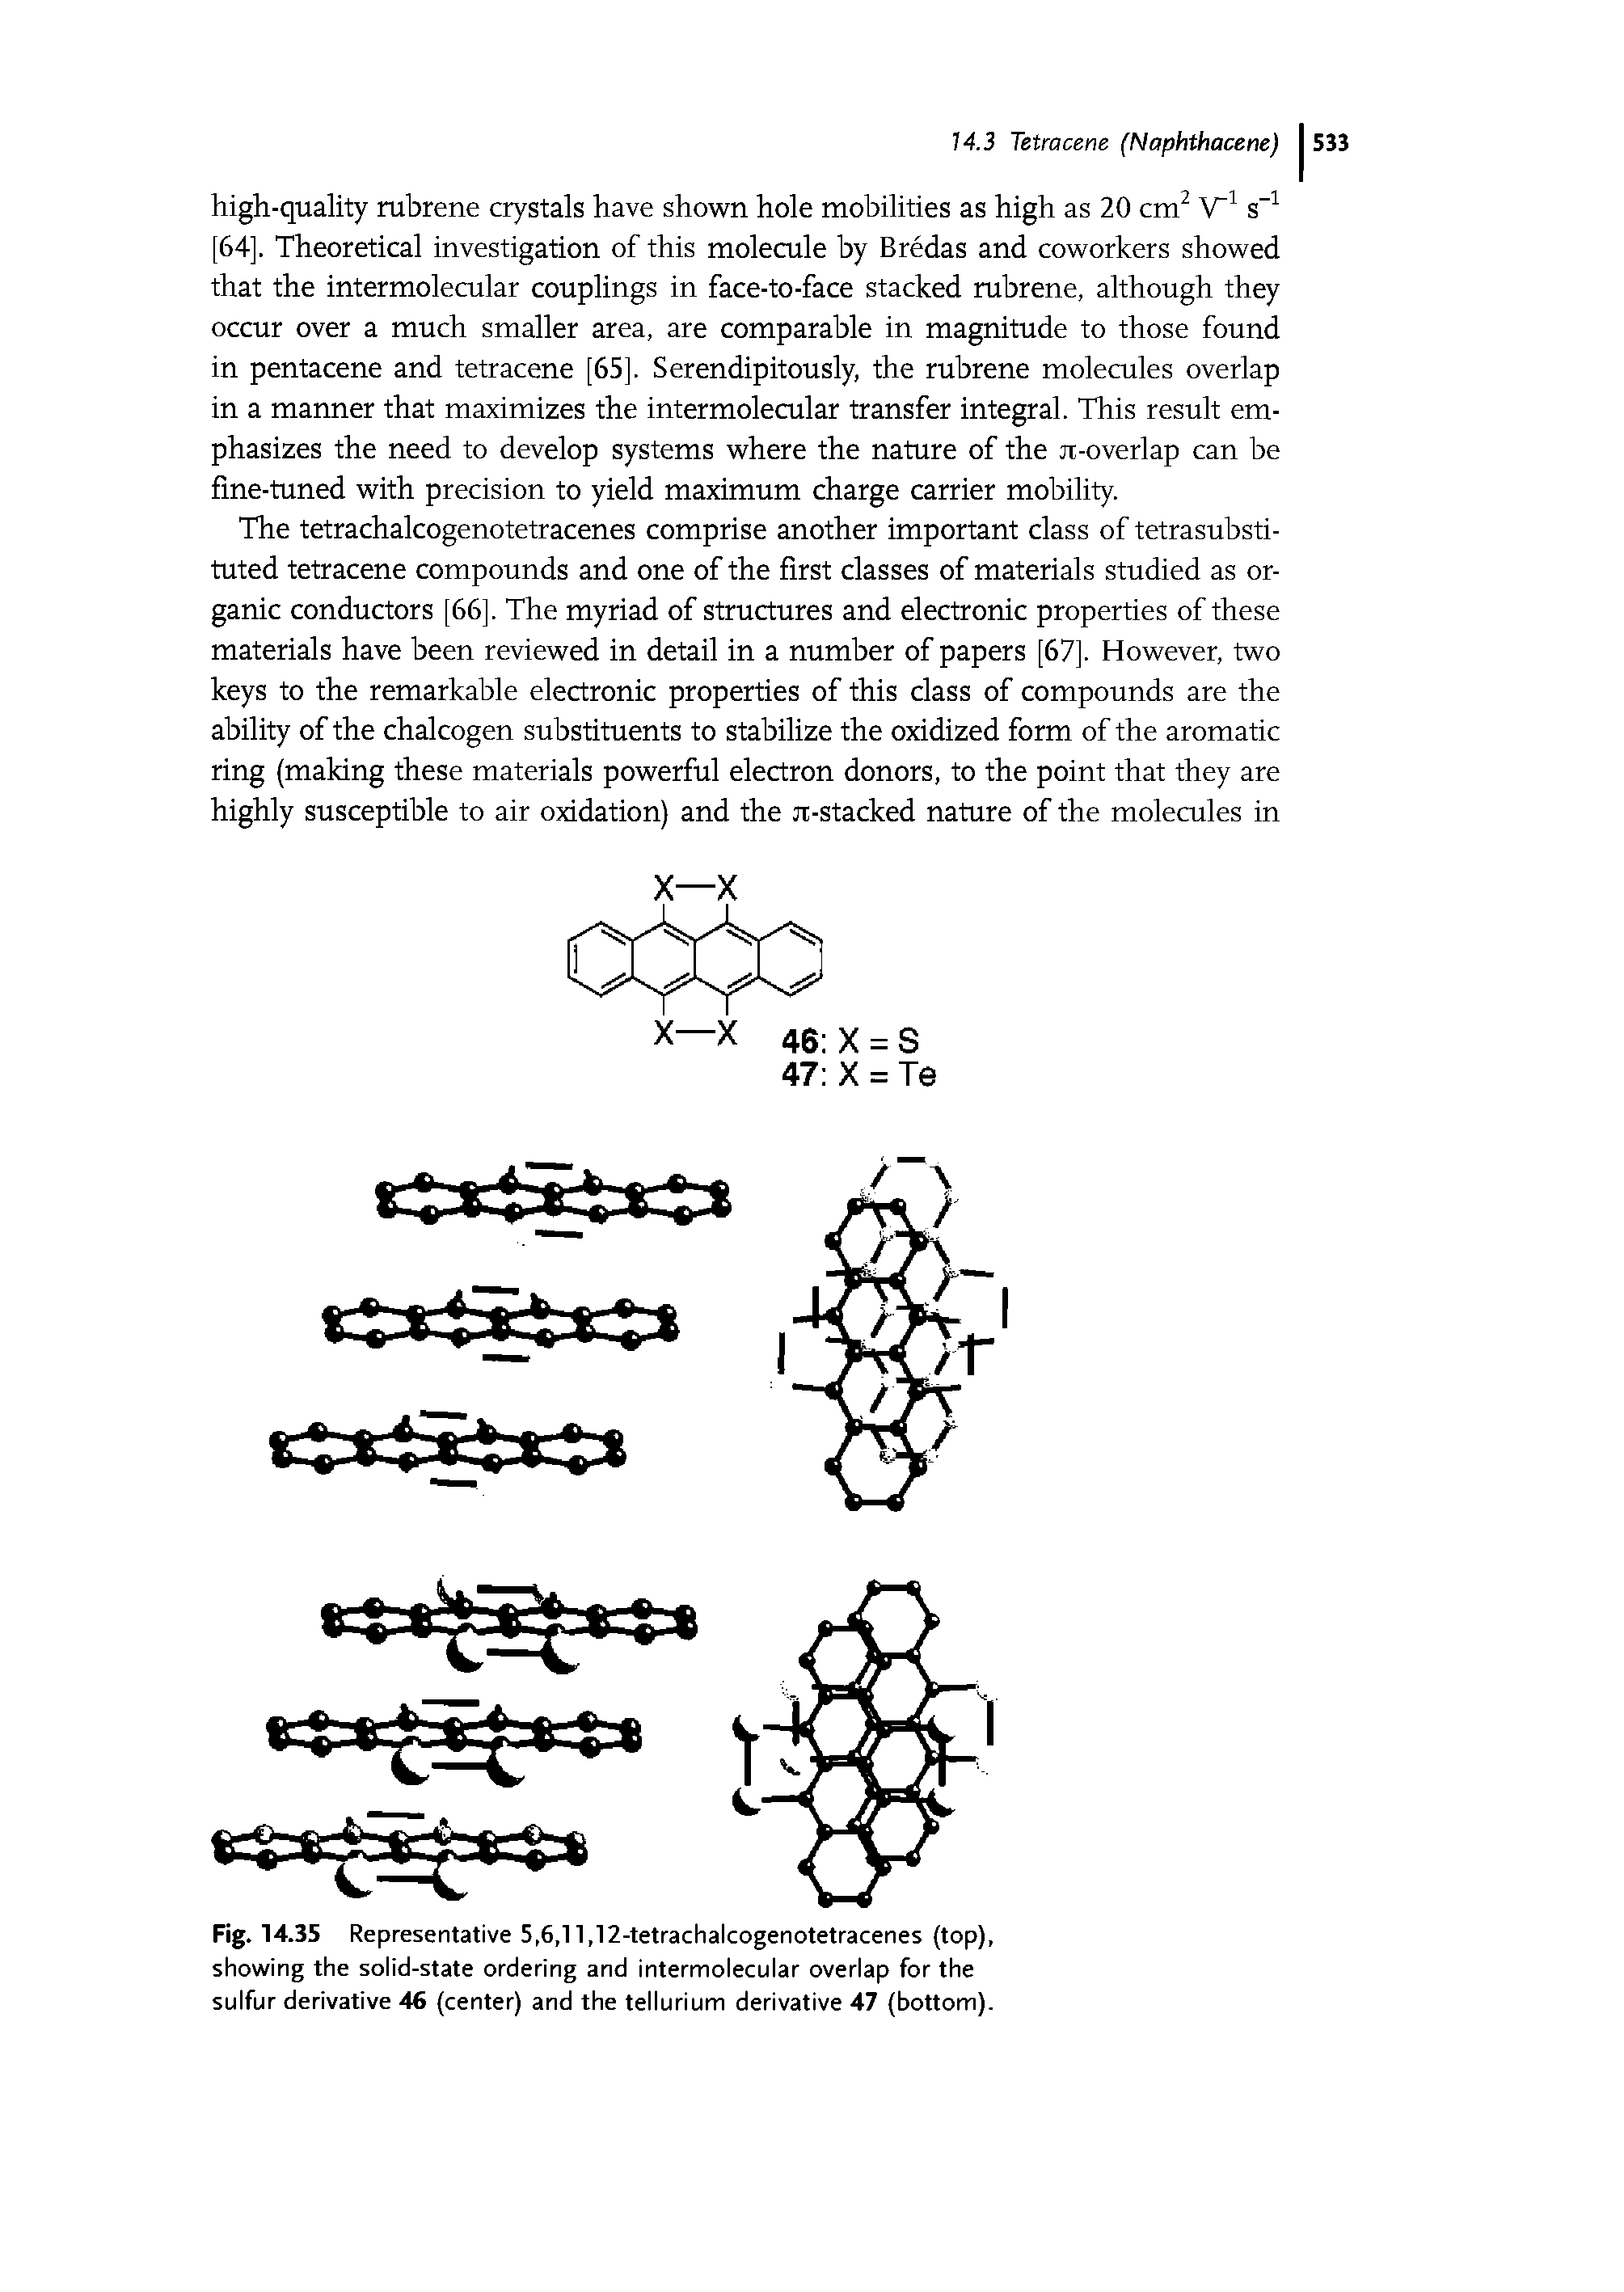 Fig. 14.35 Representative 5,6,11,12-tetrachalcogenotetracenes (top), showing the solid-state ordering and intermolecular overlap for the sulfur derivative 46 (center) and the tellurium derivative 47 (bottom).